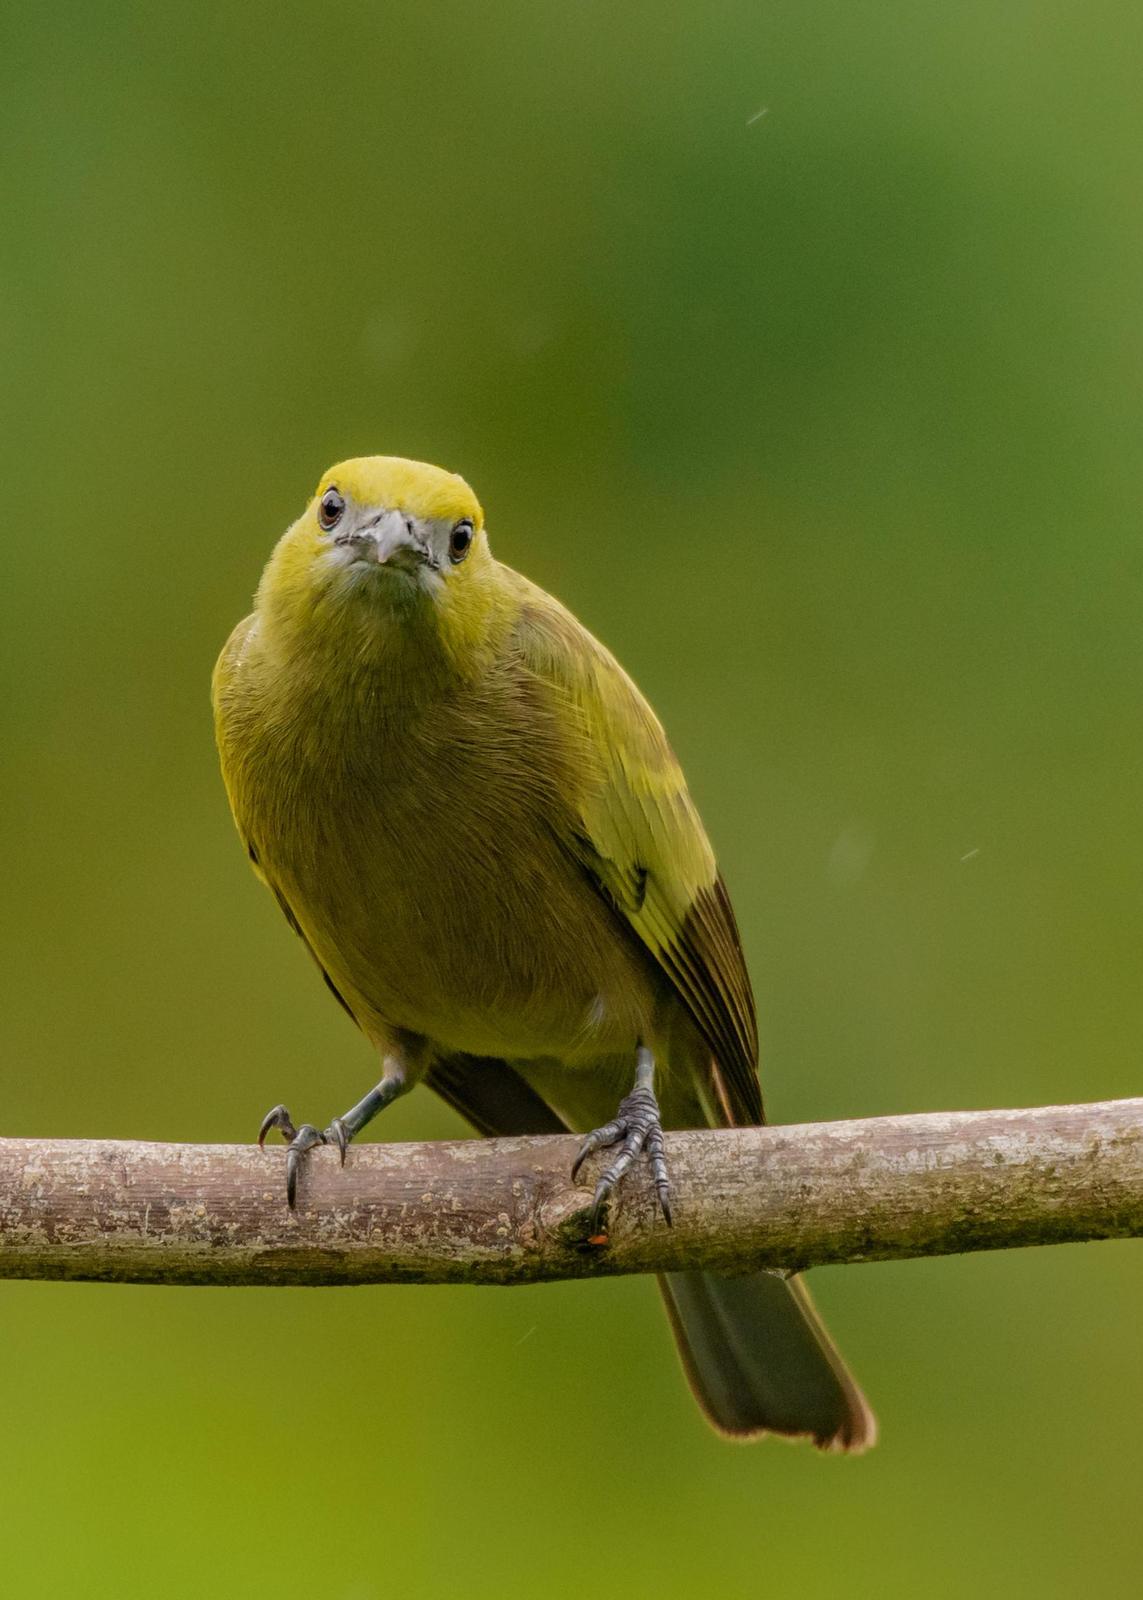 Palm Tanager Photo by Keshava Mysore